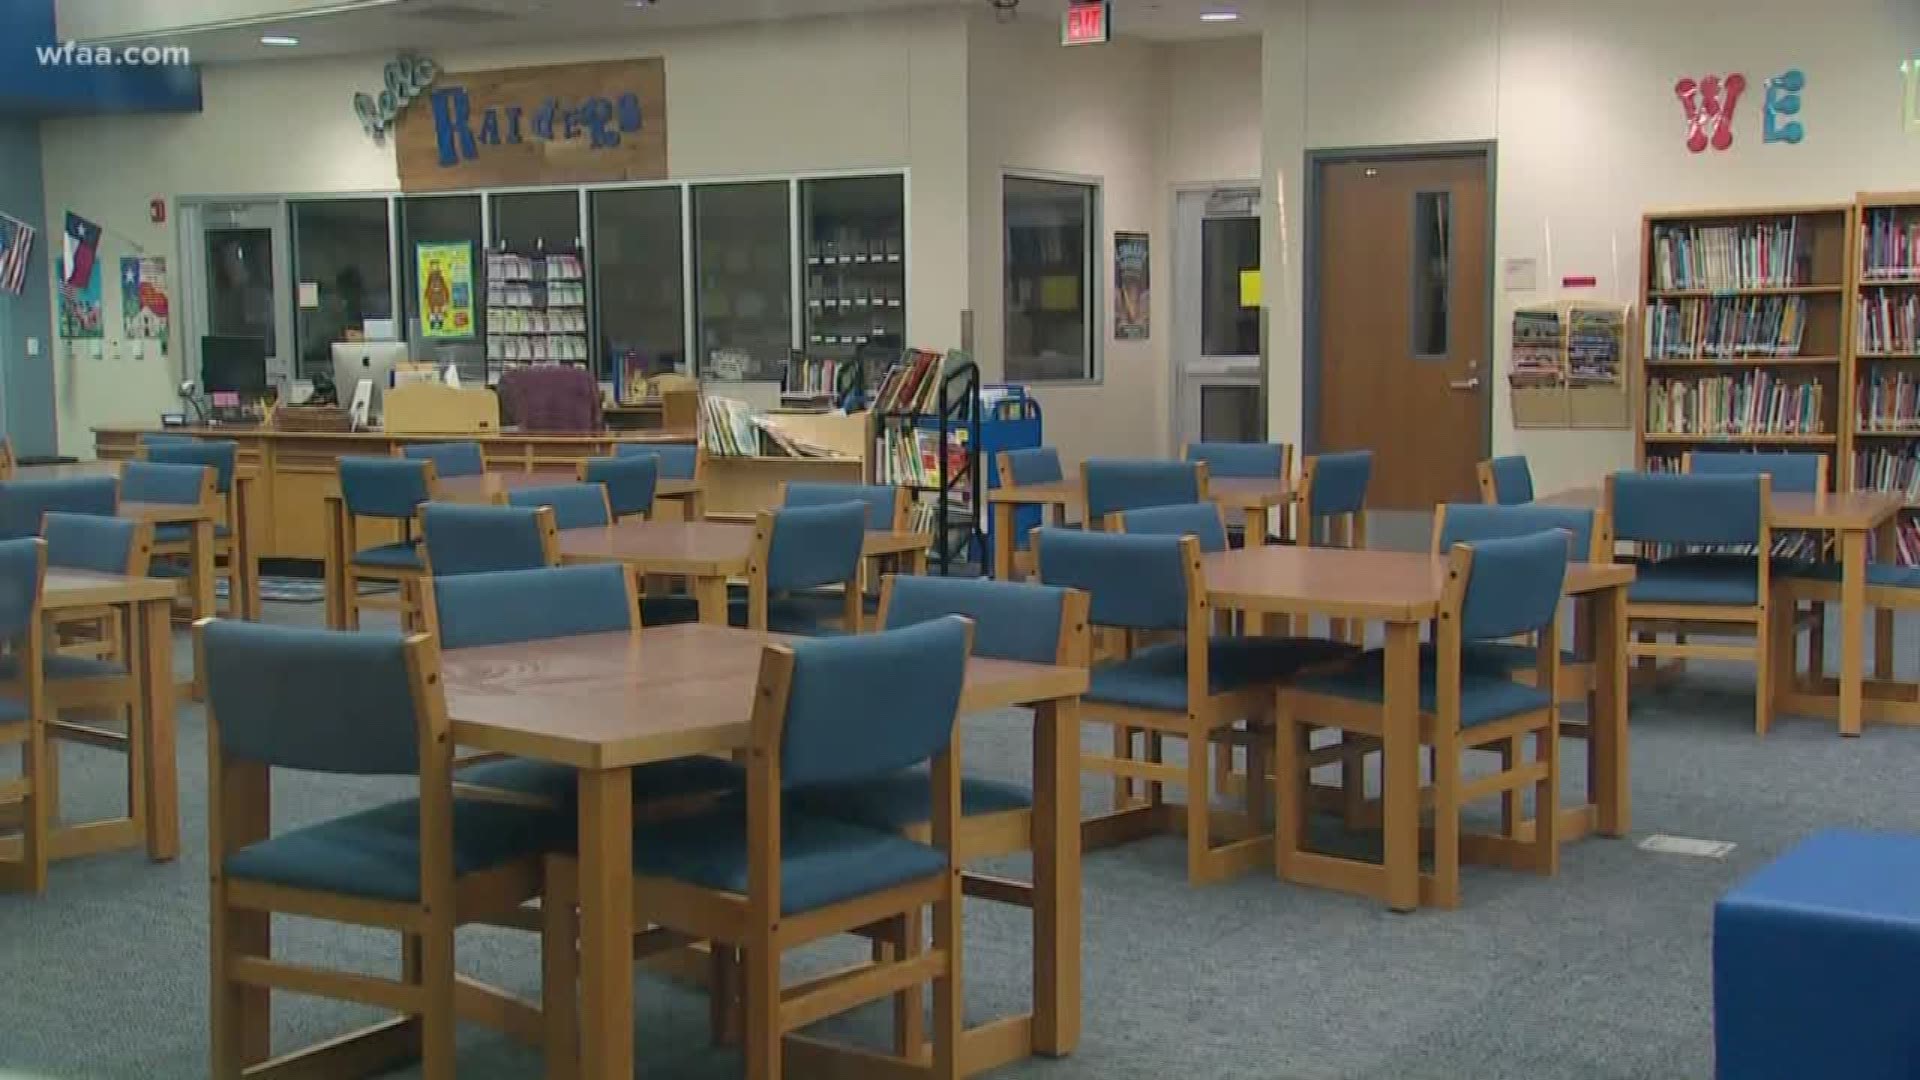 Flu outbreak forces Sunnyvale ISD to close schools